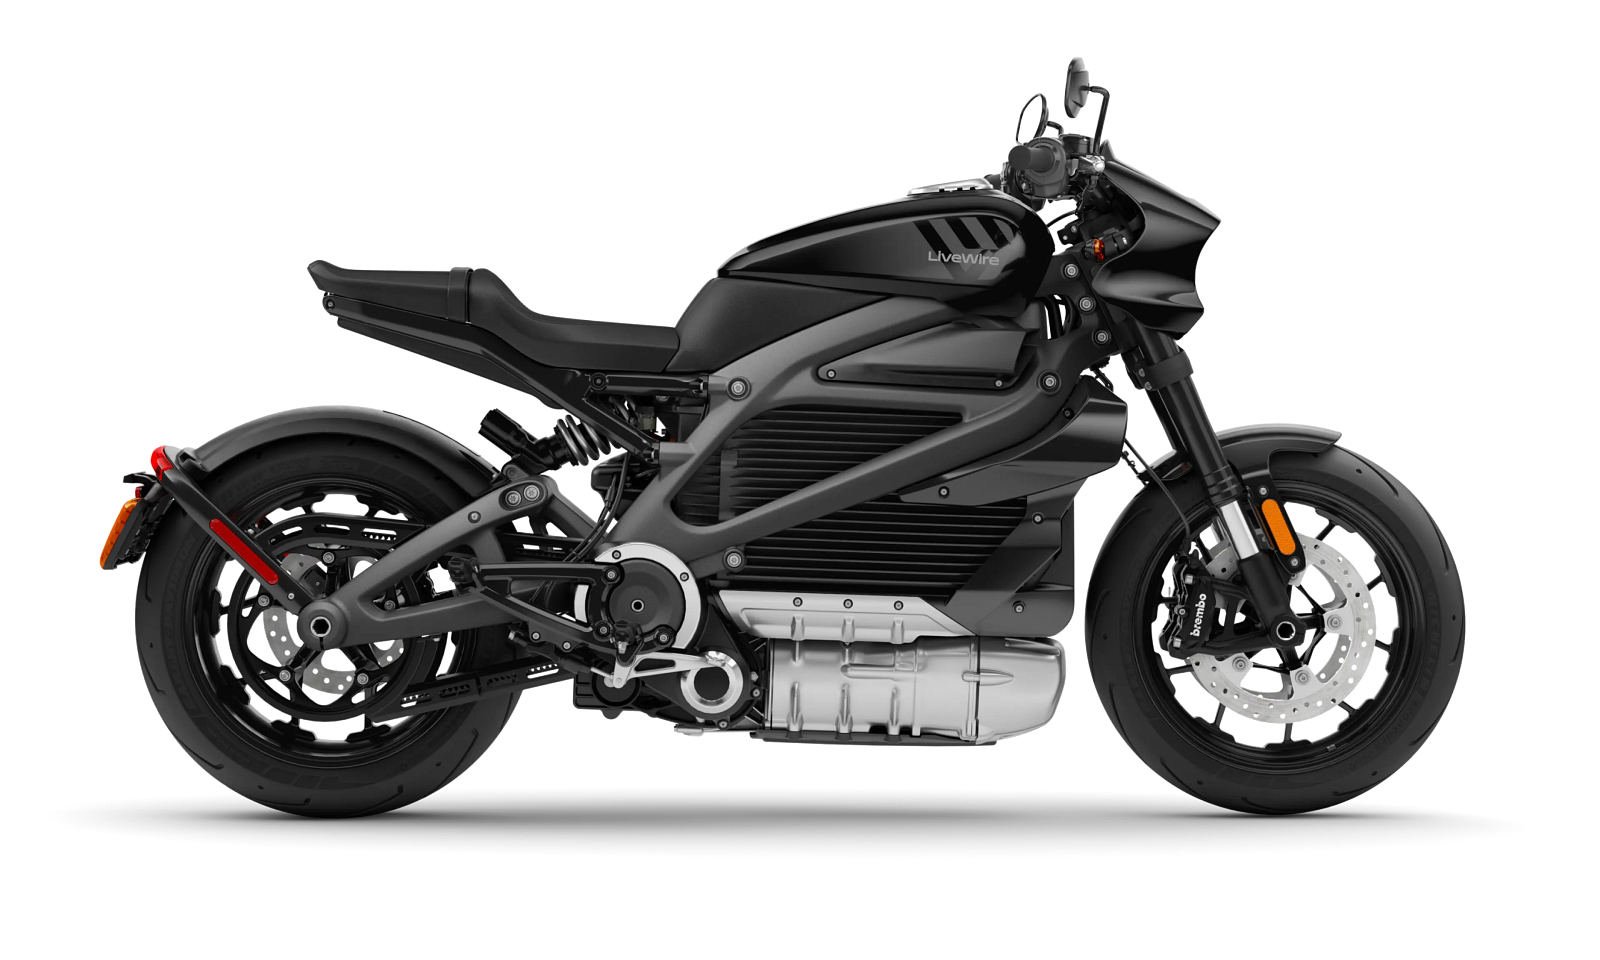 LiveWire ONE electric motorcycle